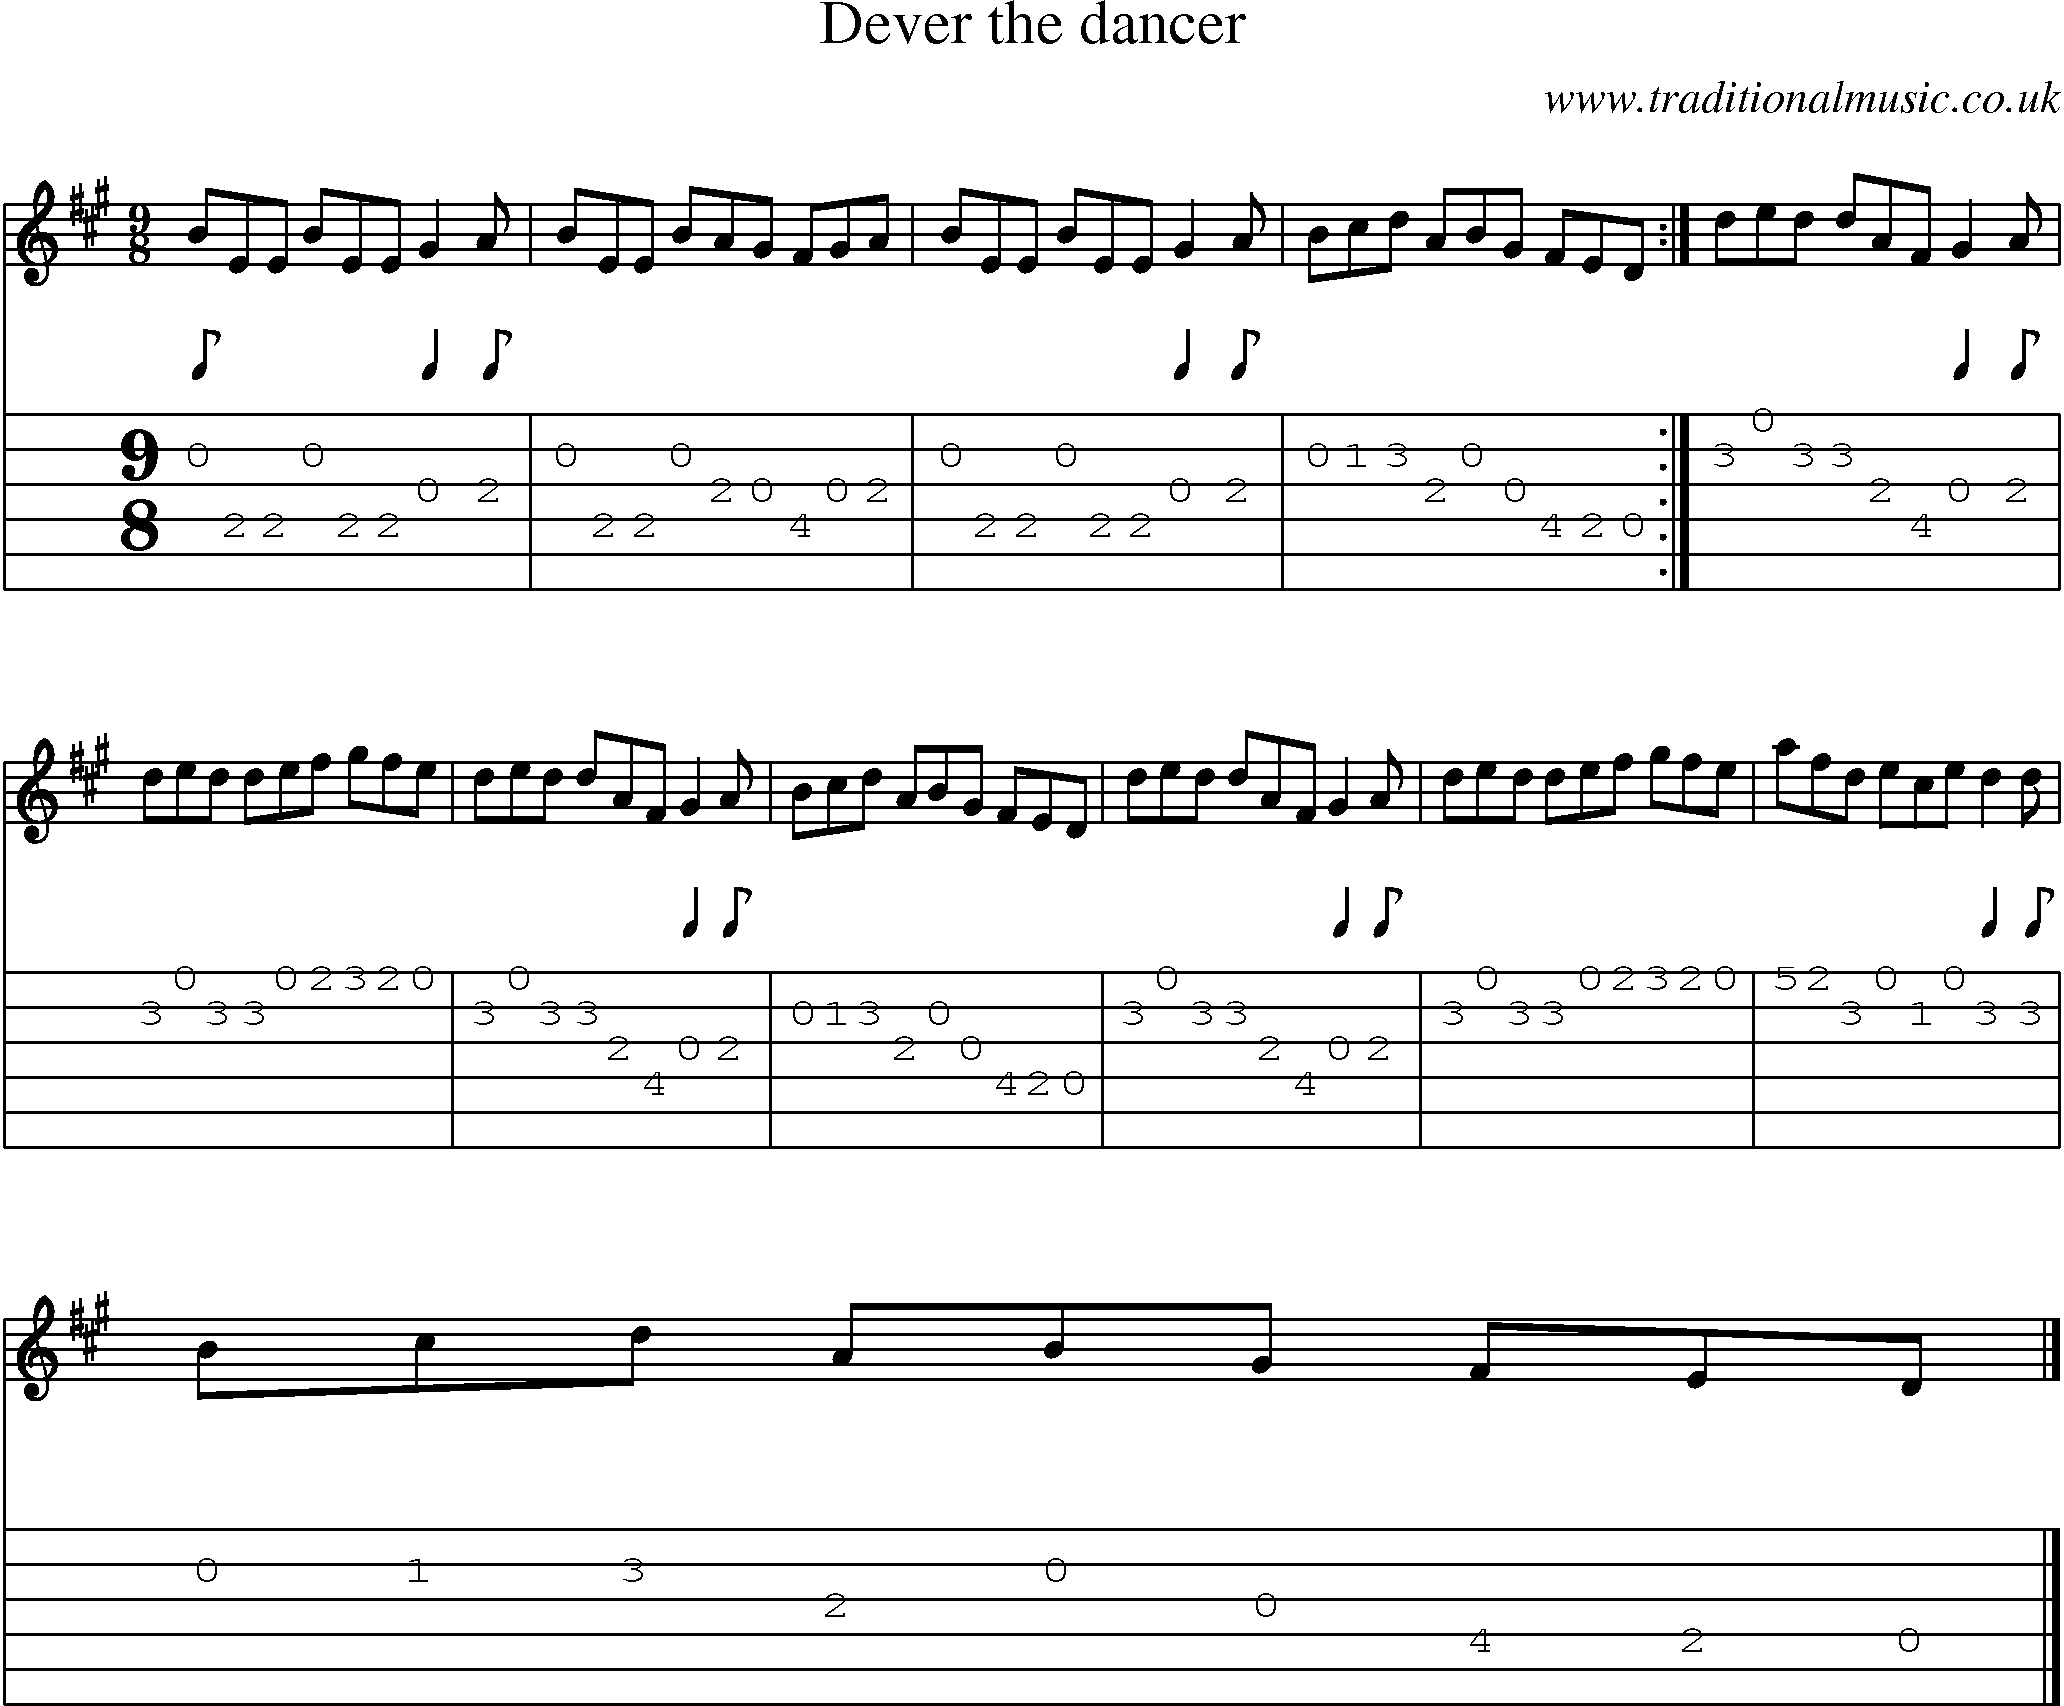 Music Score and Guitar Tabs for Dever The Dancer